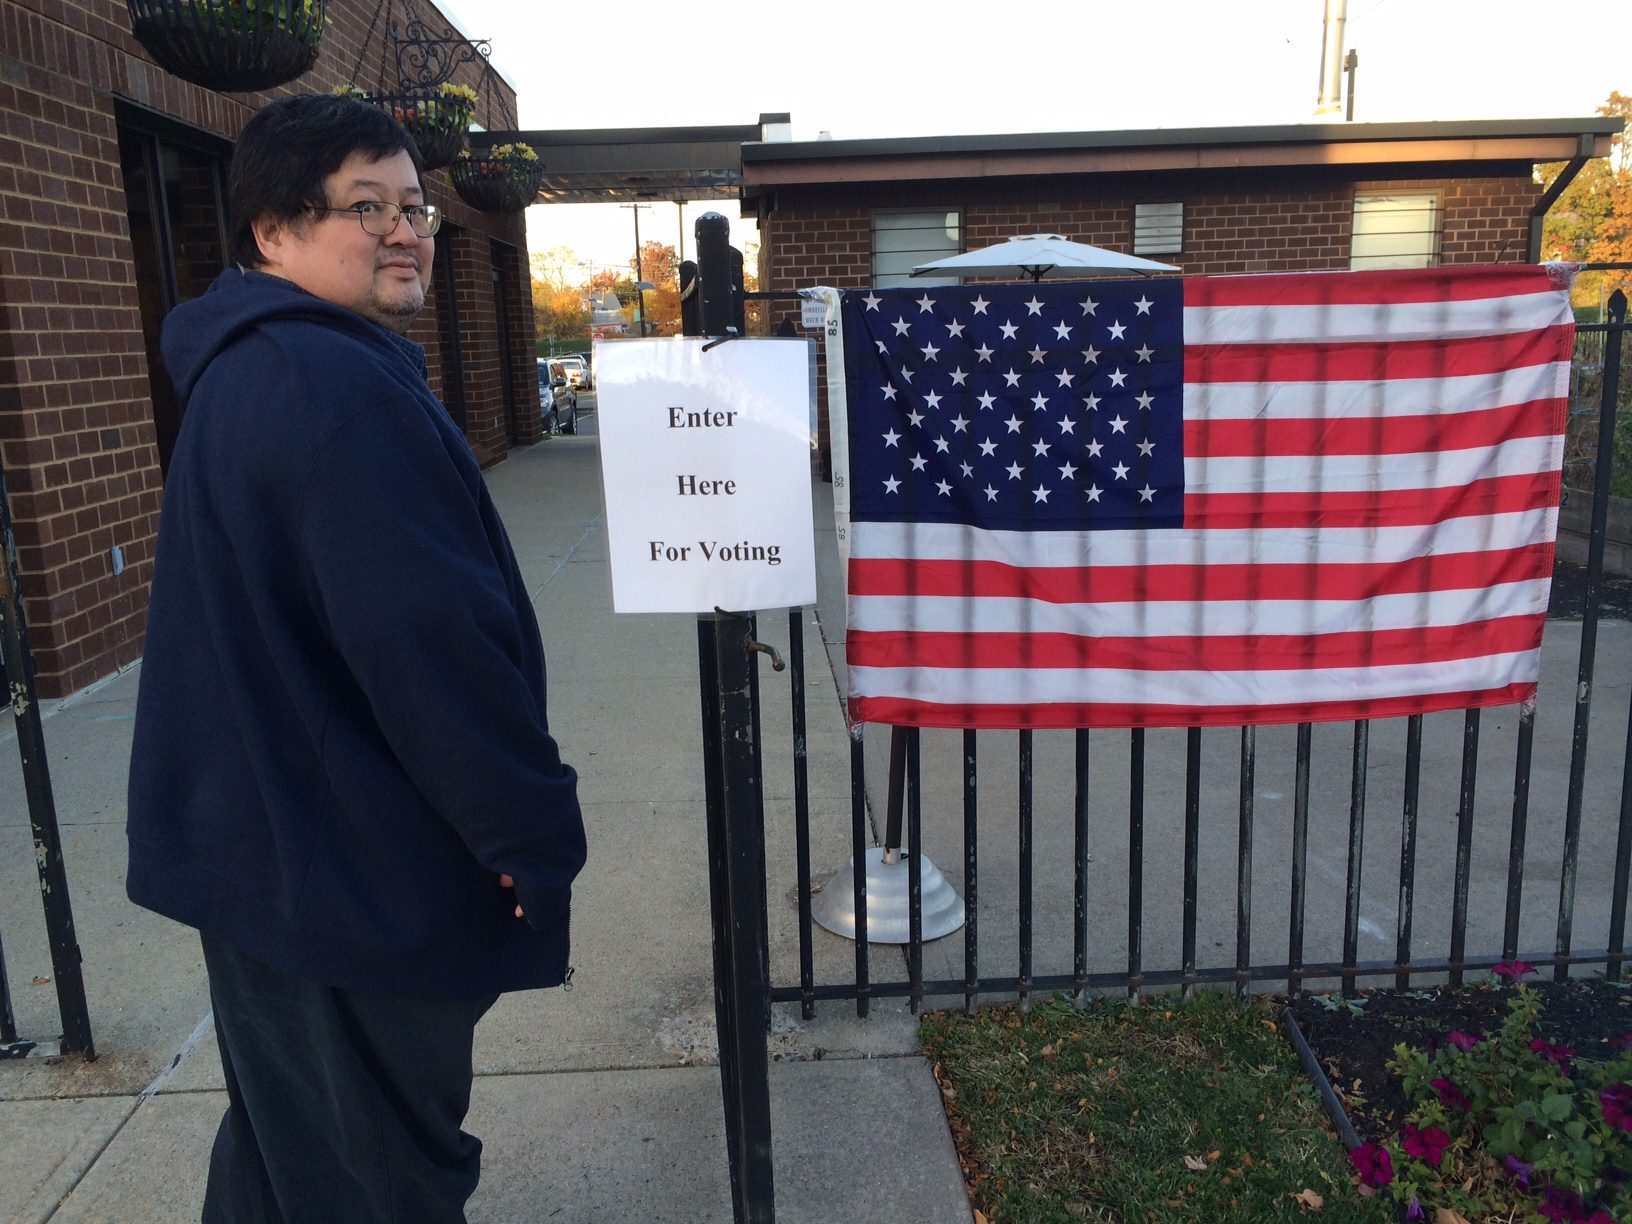 On a clear day in November: Voting in Rahway, New Jersey